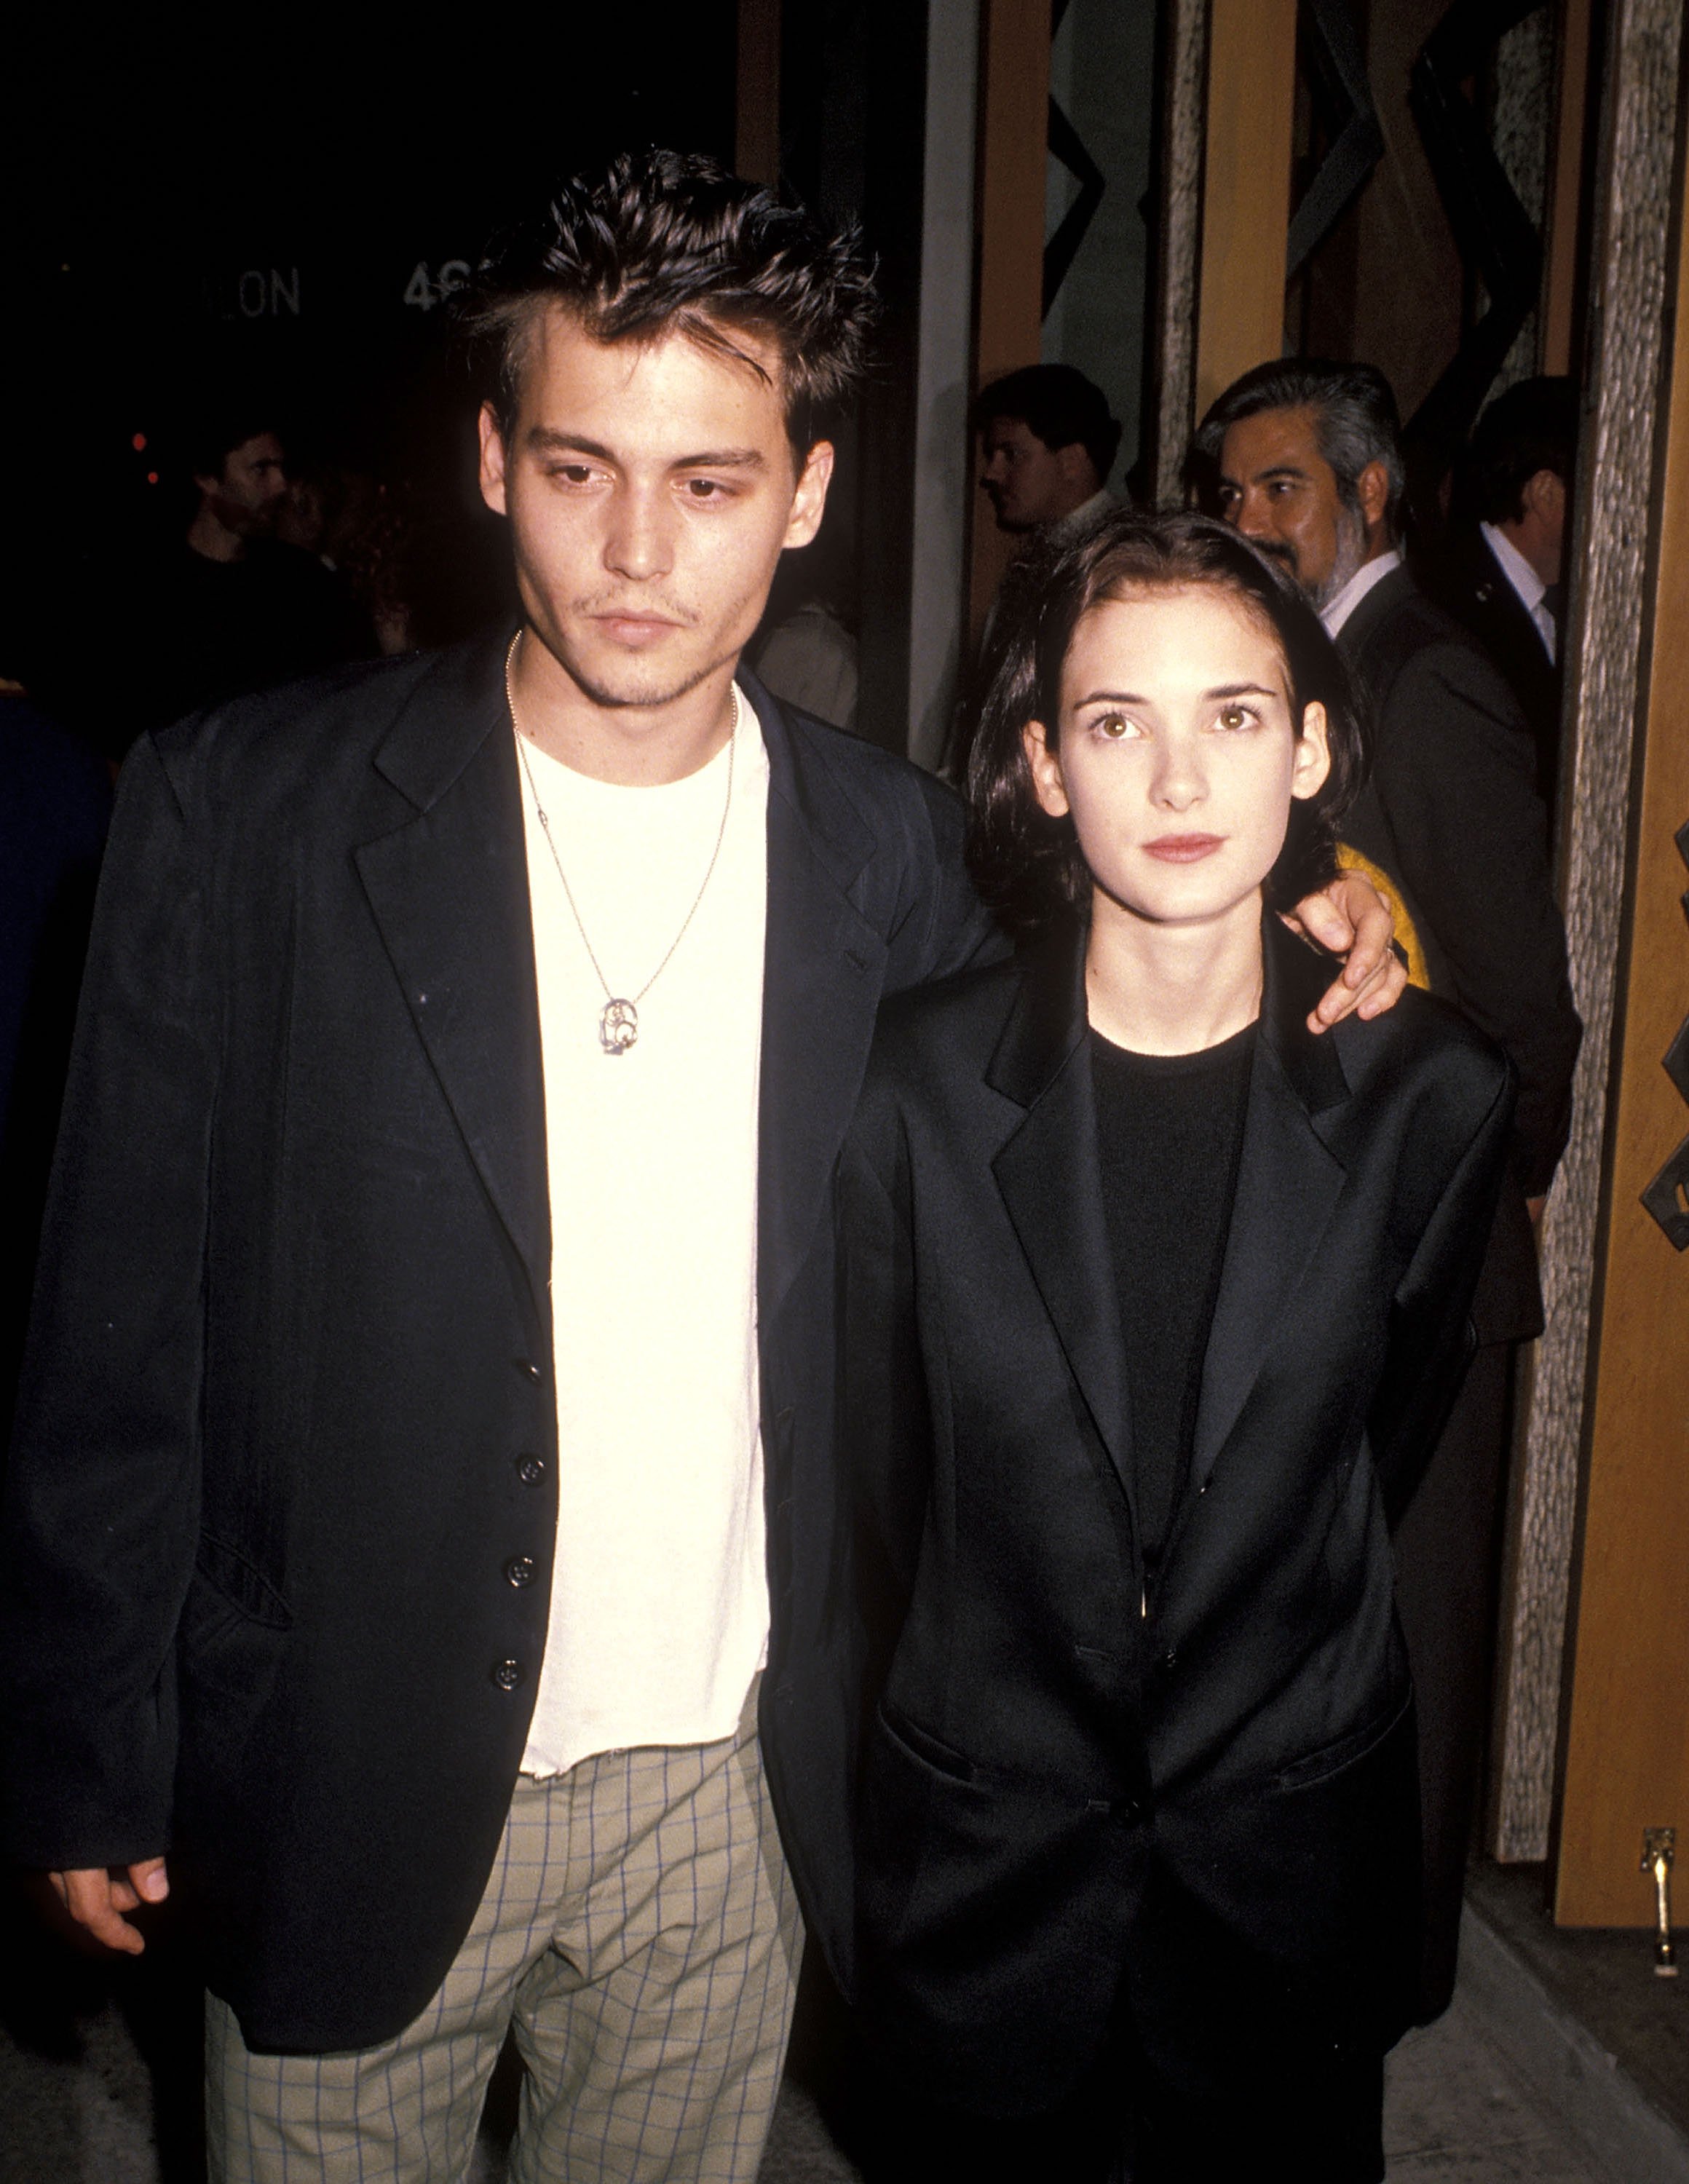 Johnny Depp and Winona Ryder at the "Pacific Heights" premiere on September 24, 1990, in Westwood, California. | Source: Getty Images